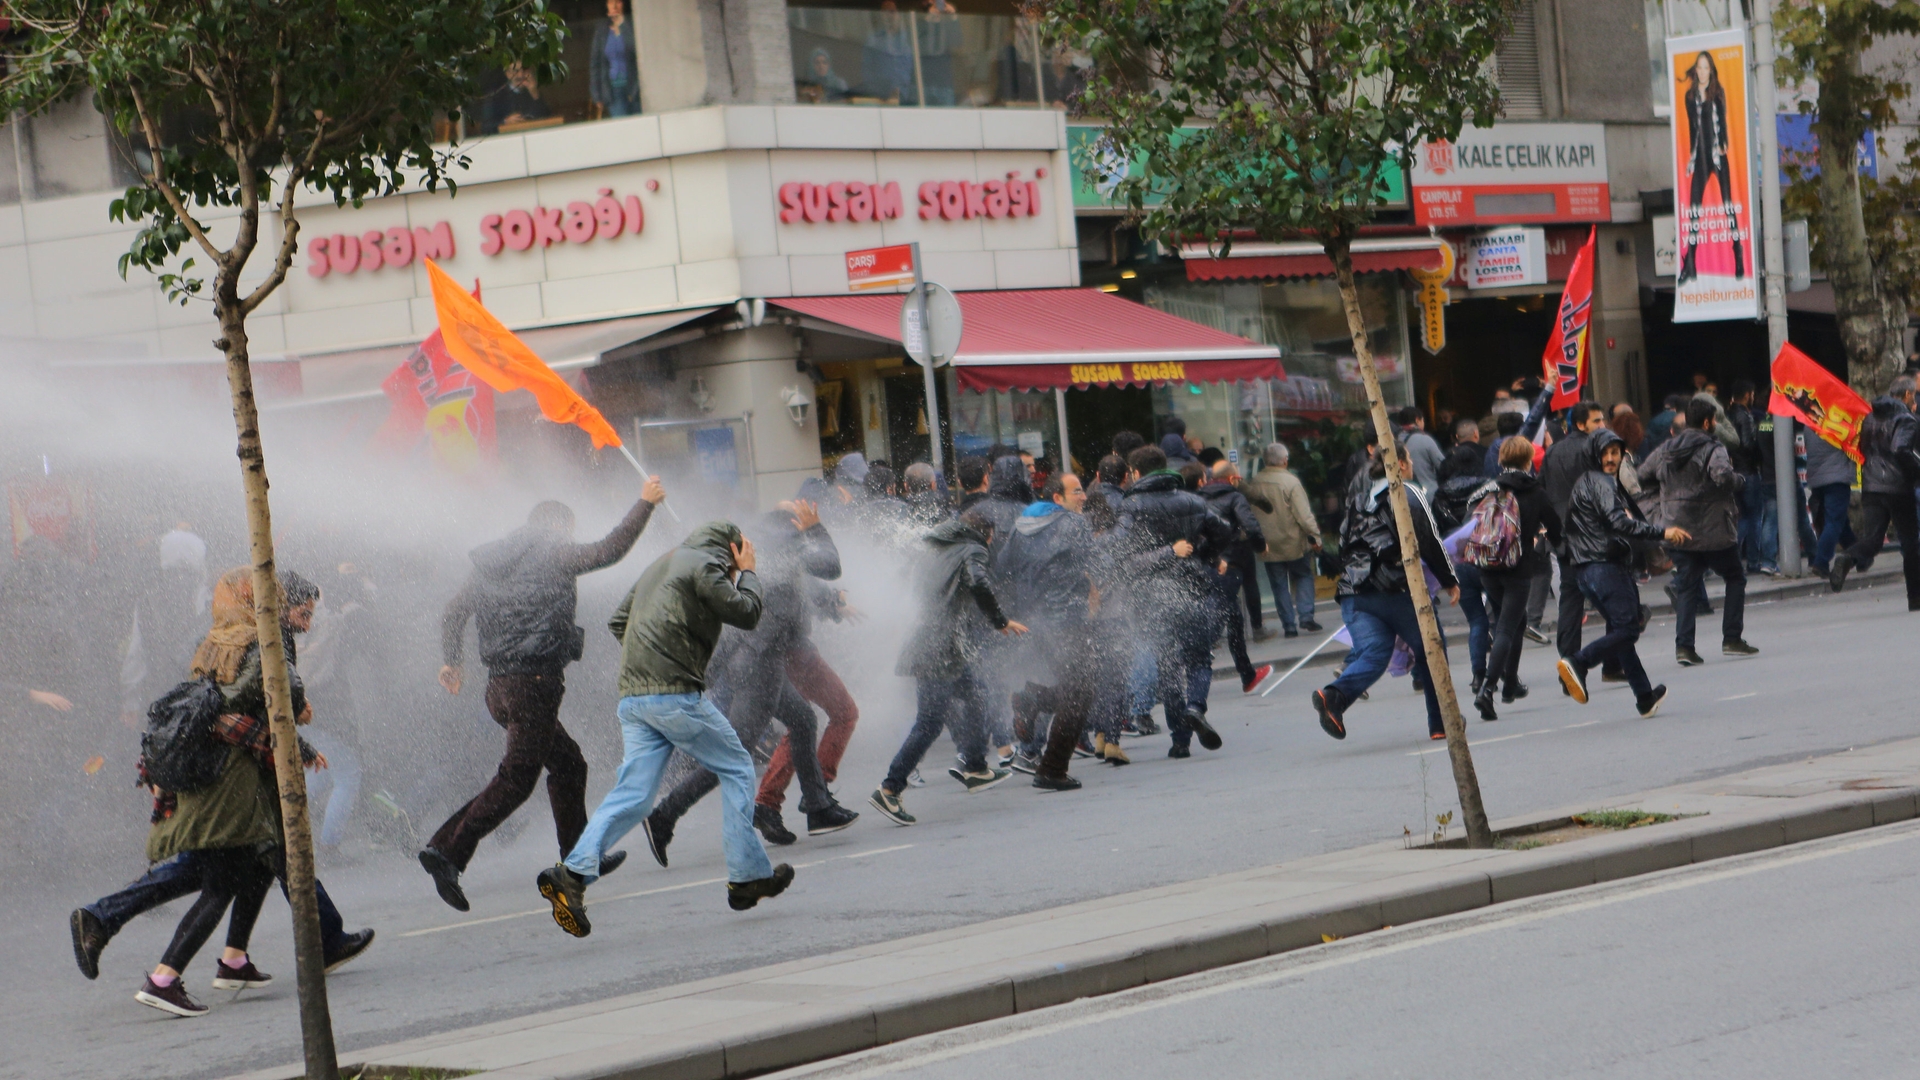 TURKEY-SECURITY/NEWSPAPER-PROTESTS